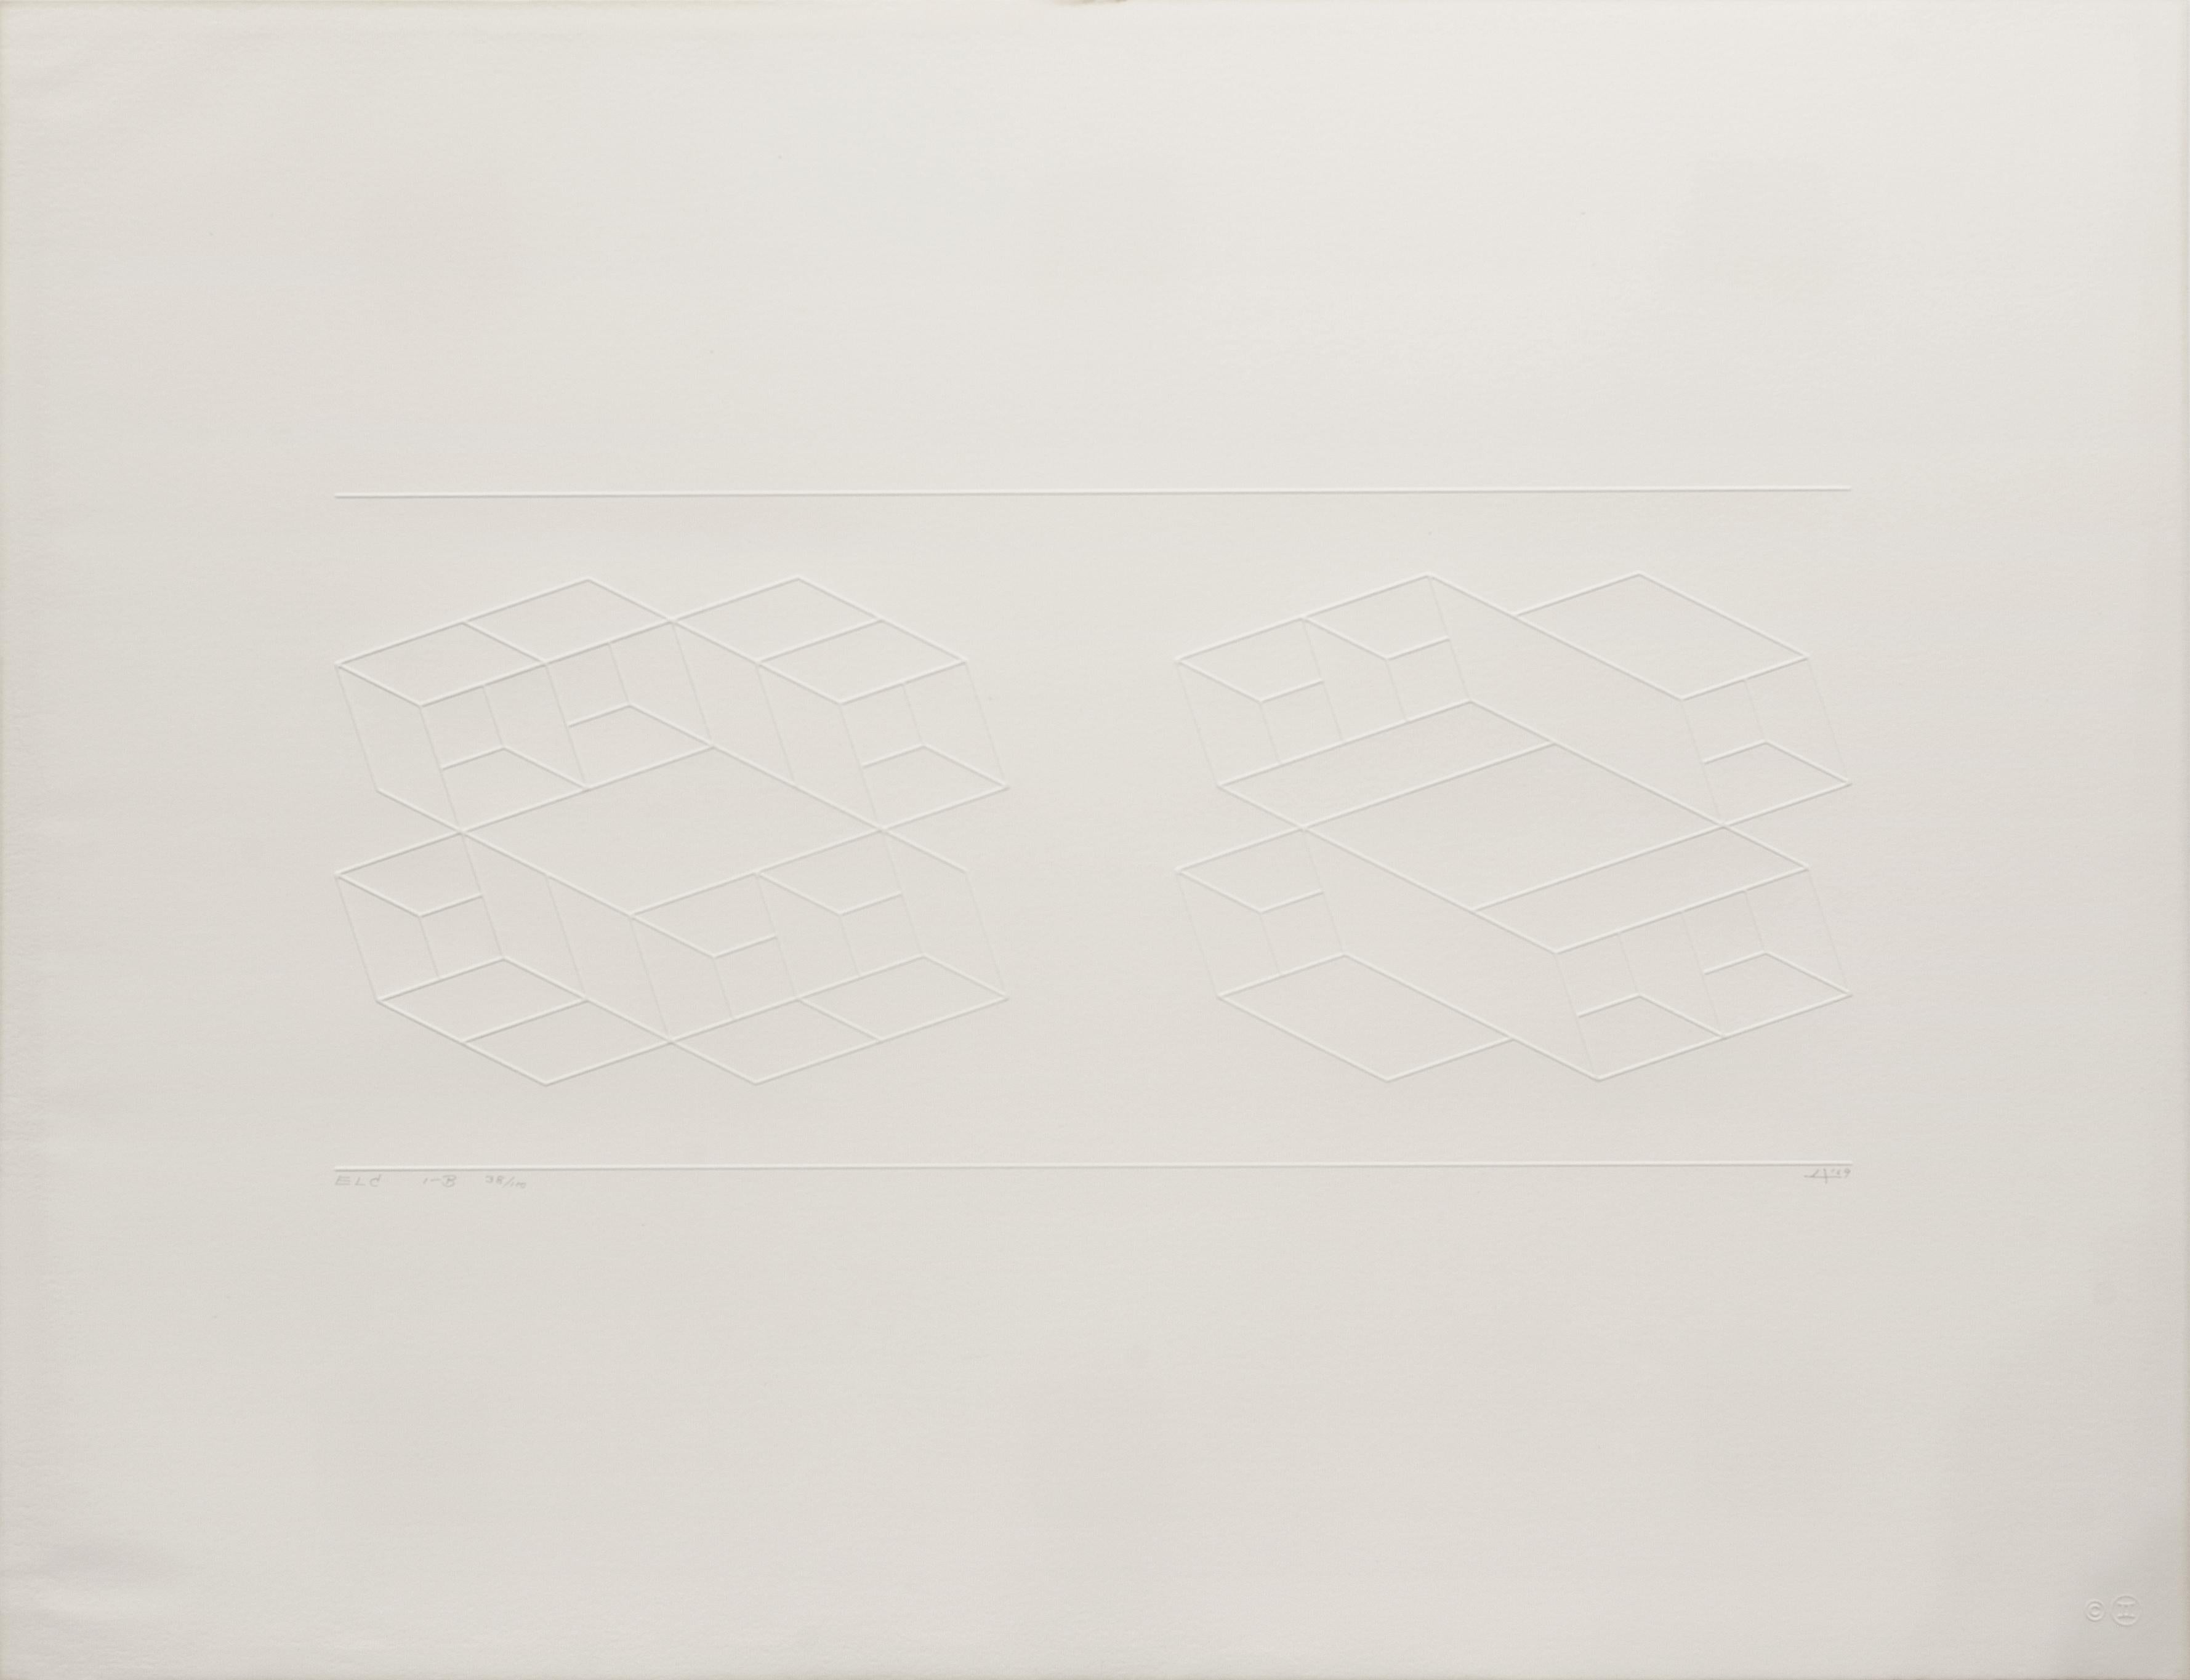 Embossed Linear Constructions (ELC) 1-B, 1969 - Print by Josef Albers